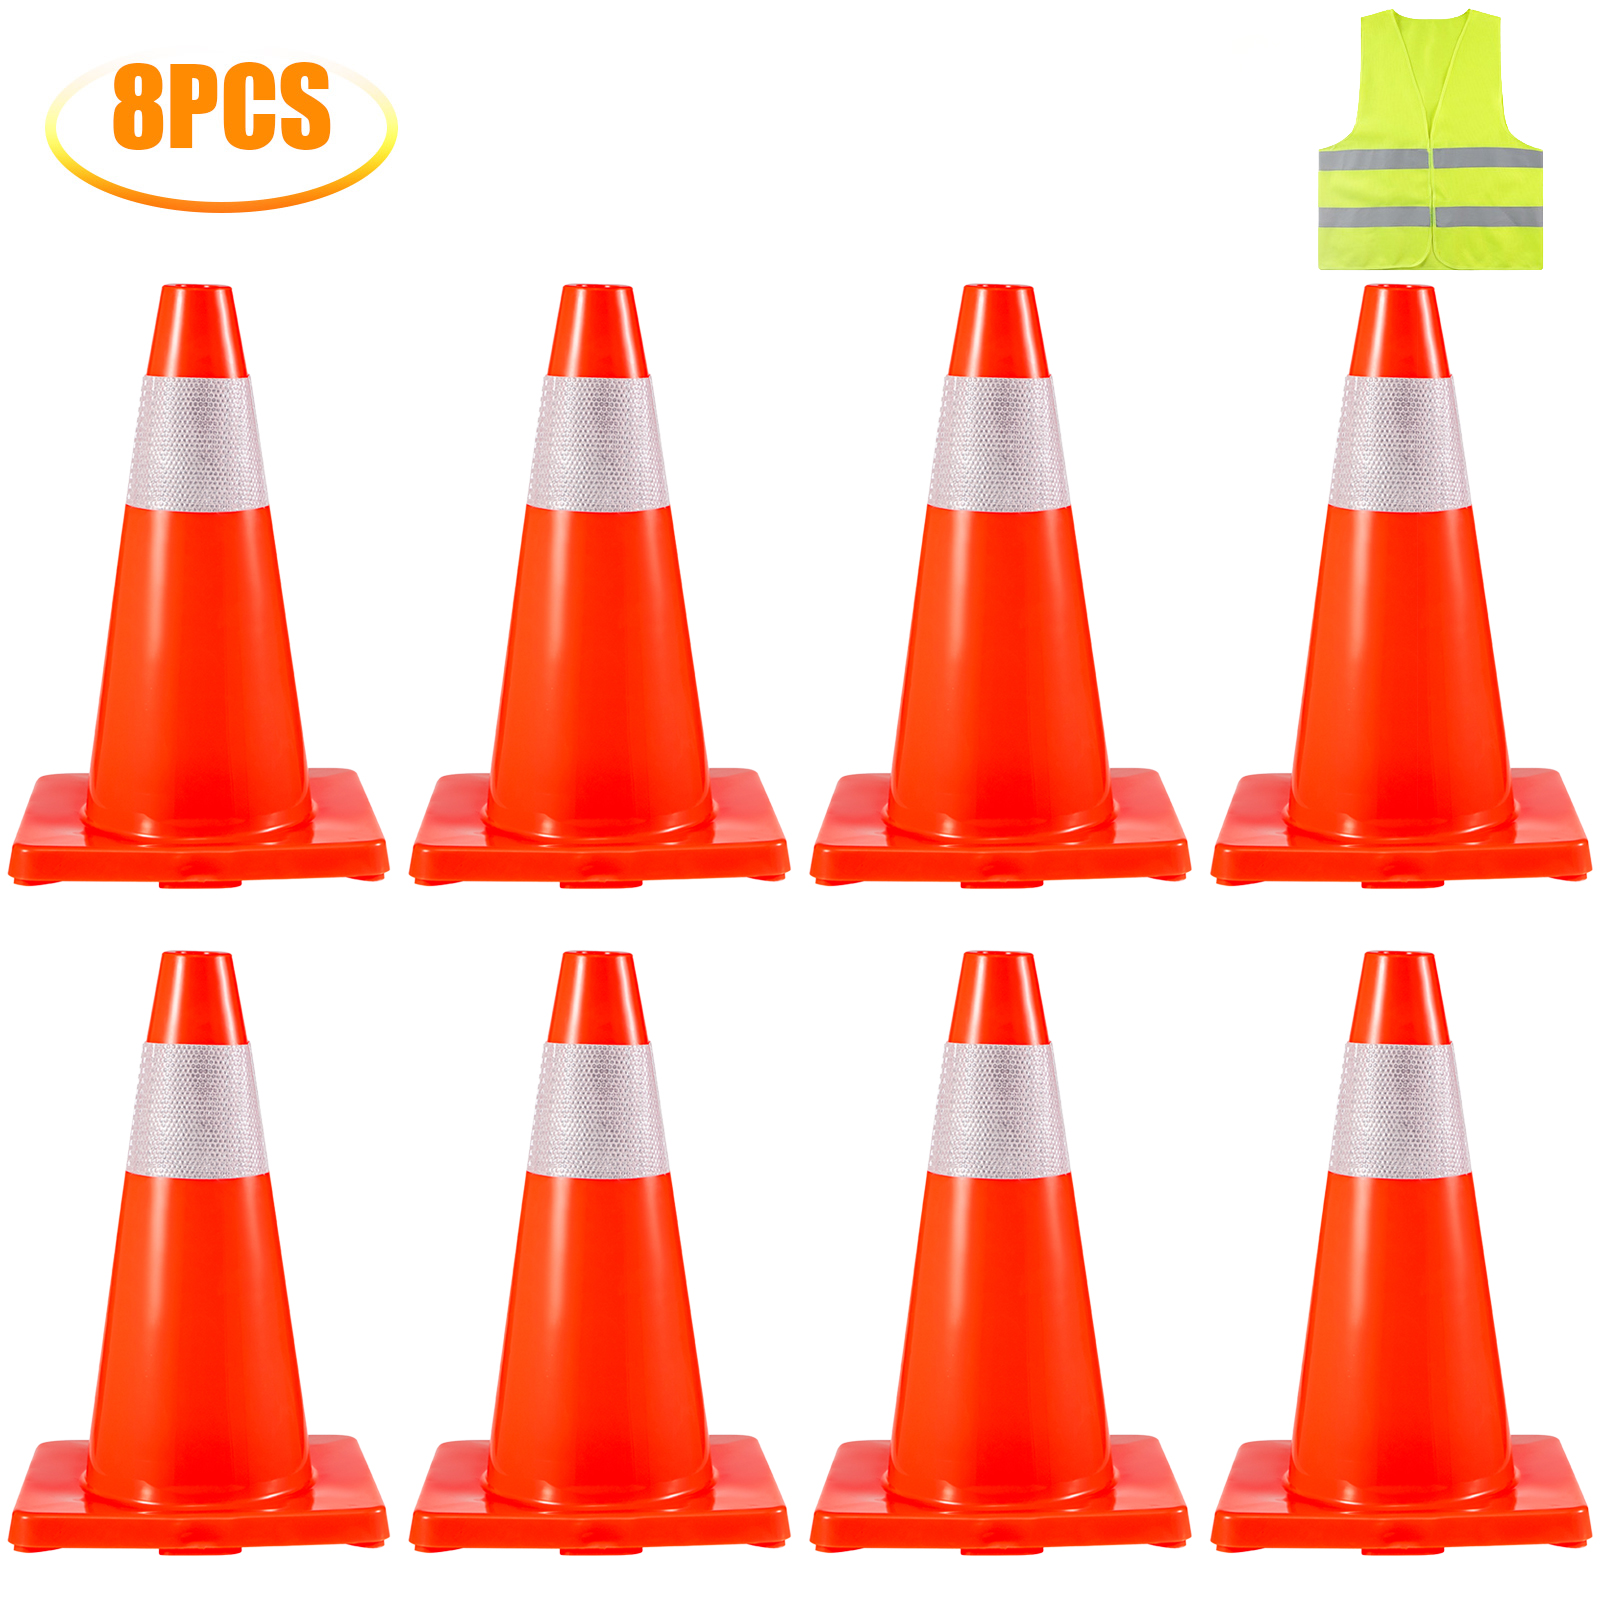 Traffic Safety Cones 8 PCS PVC Parking Cones 18" W/ 1 Reflective Collars 11" X 11" Red PVC Base For Higher Warning Roads Construction Sites от Vevor Many GEOs